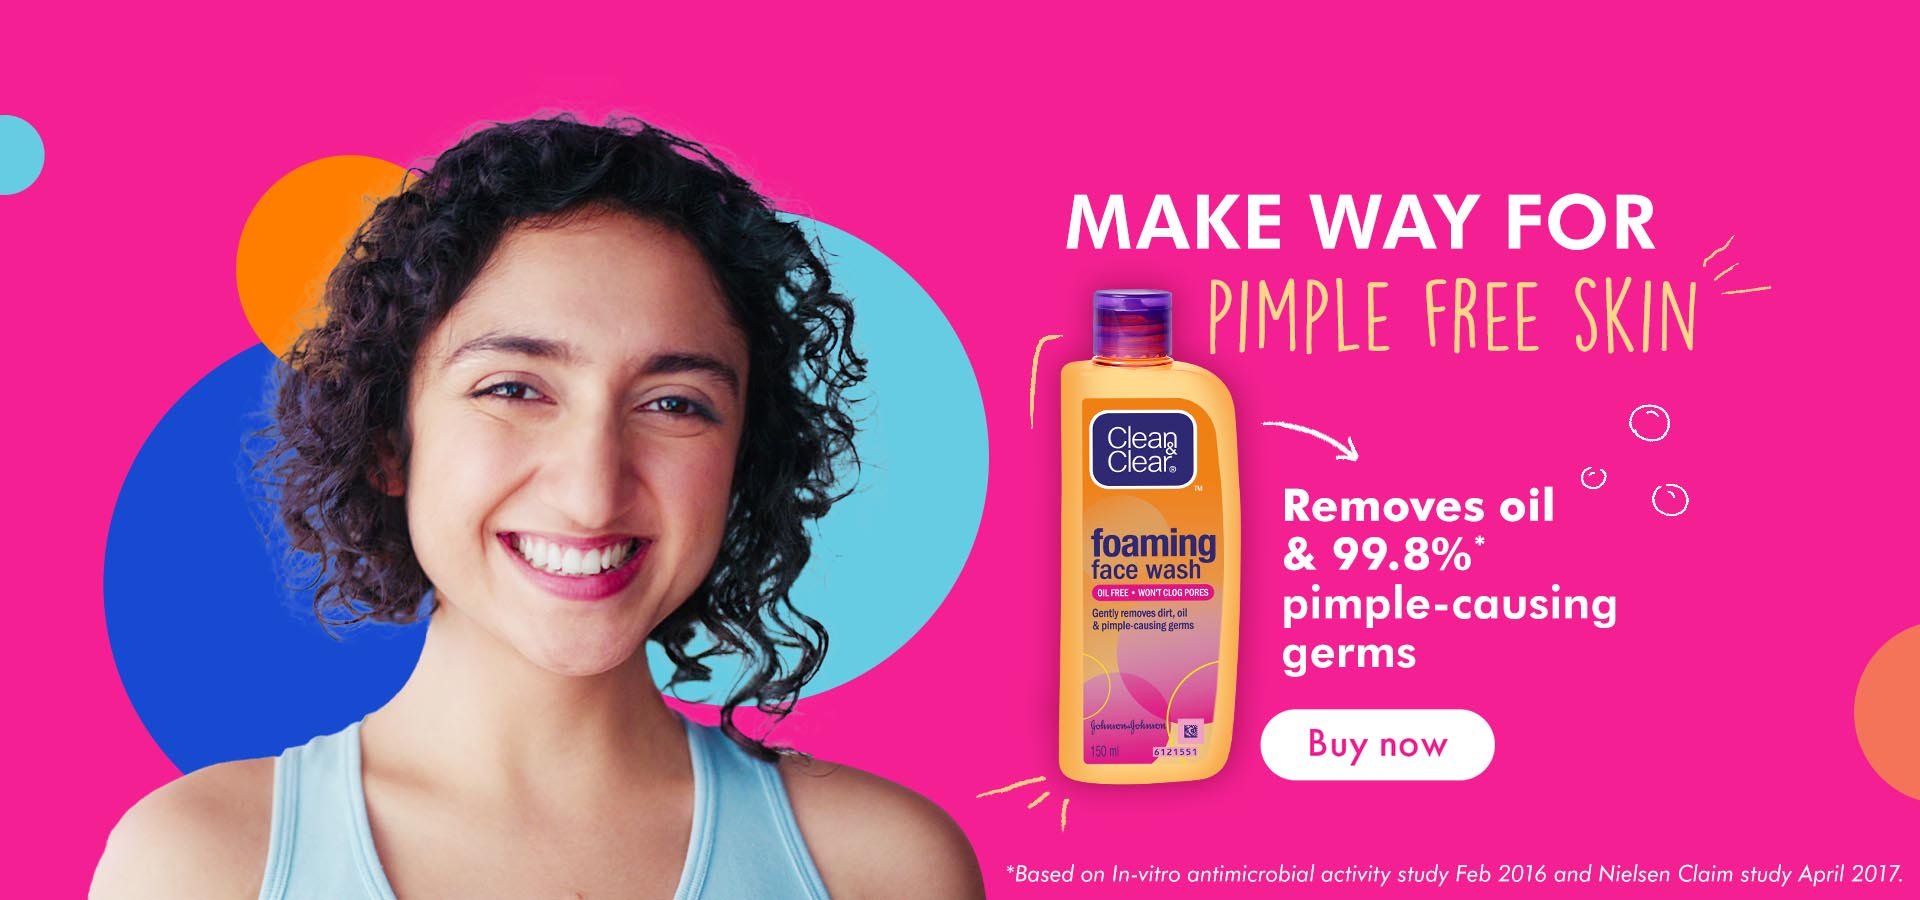 MAKE WAY FOR PIMPLE FREE SKIN